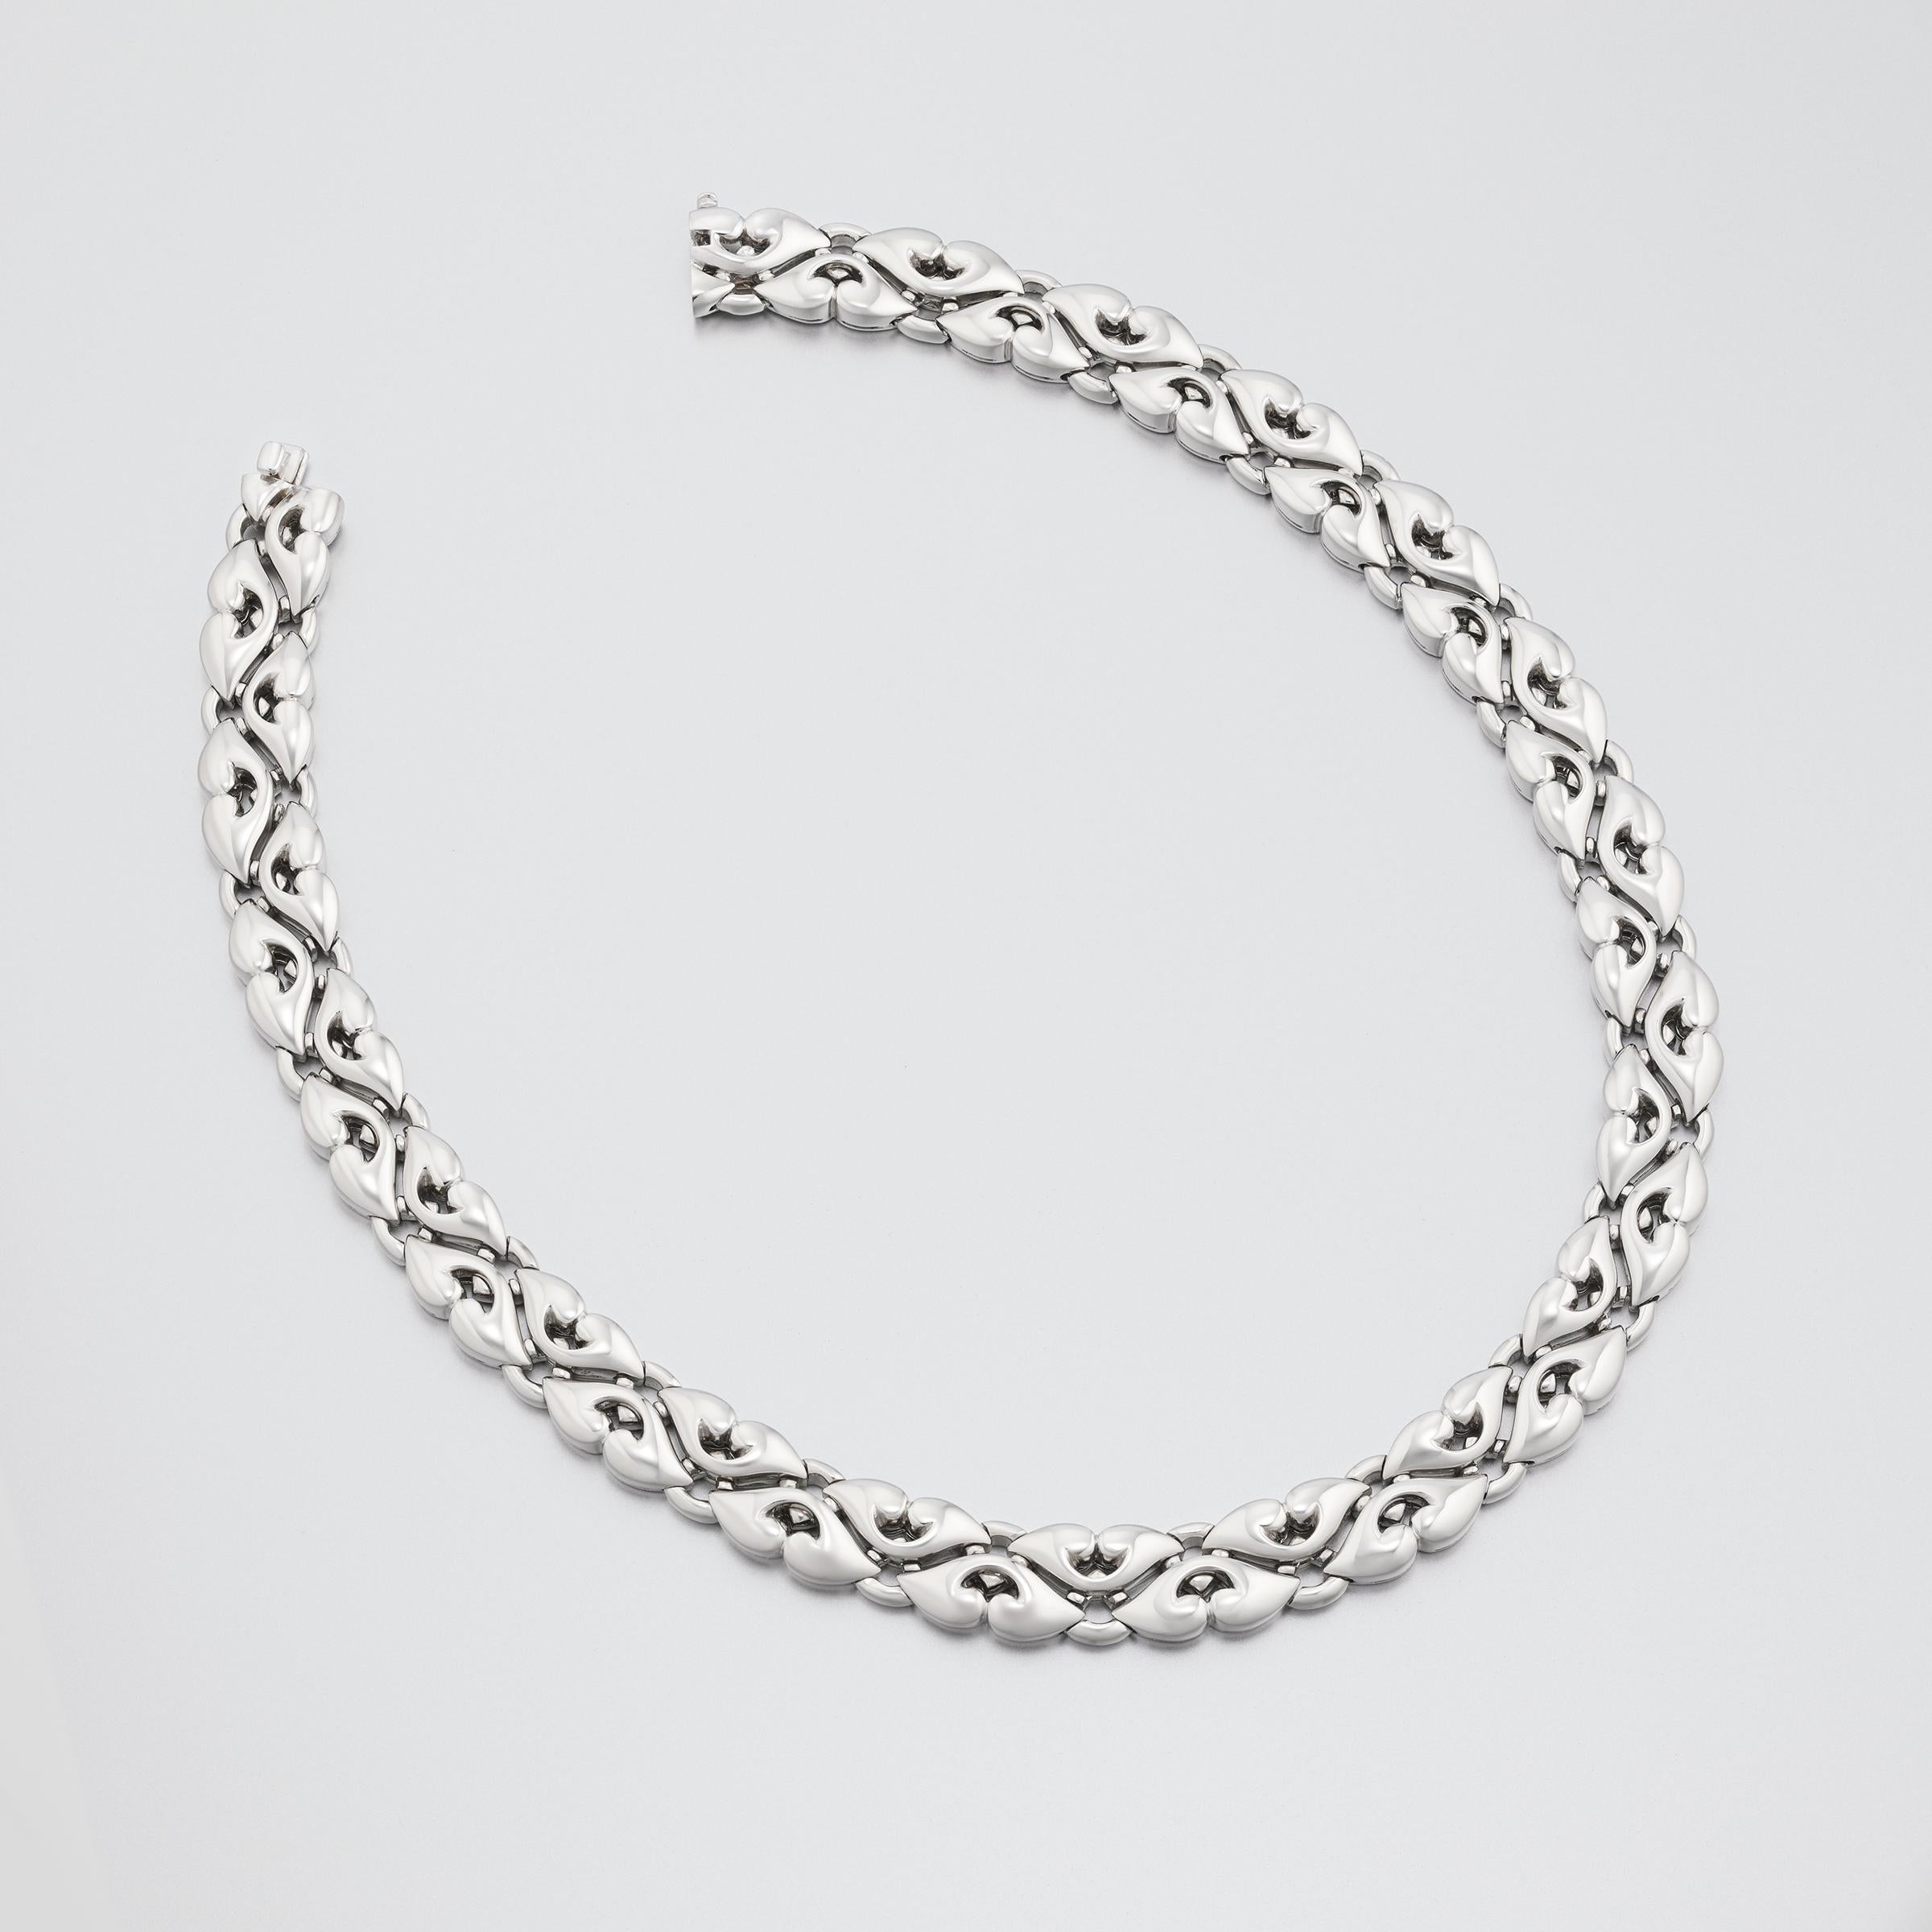 Luminous vintage Bulgari necklace exceptionally crafted in solid 18 karat white gold. The necklace is sumptuous with lavish width of over half an inch (13mm) and substantial weight (approximately 165 grams). Intricately designed polished white-gold